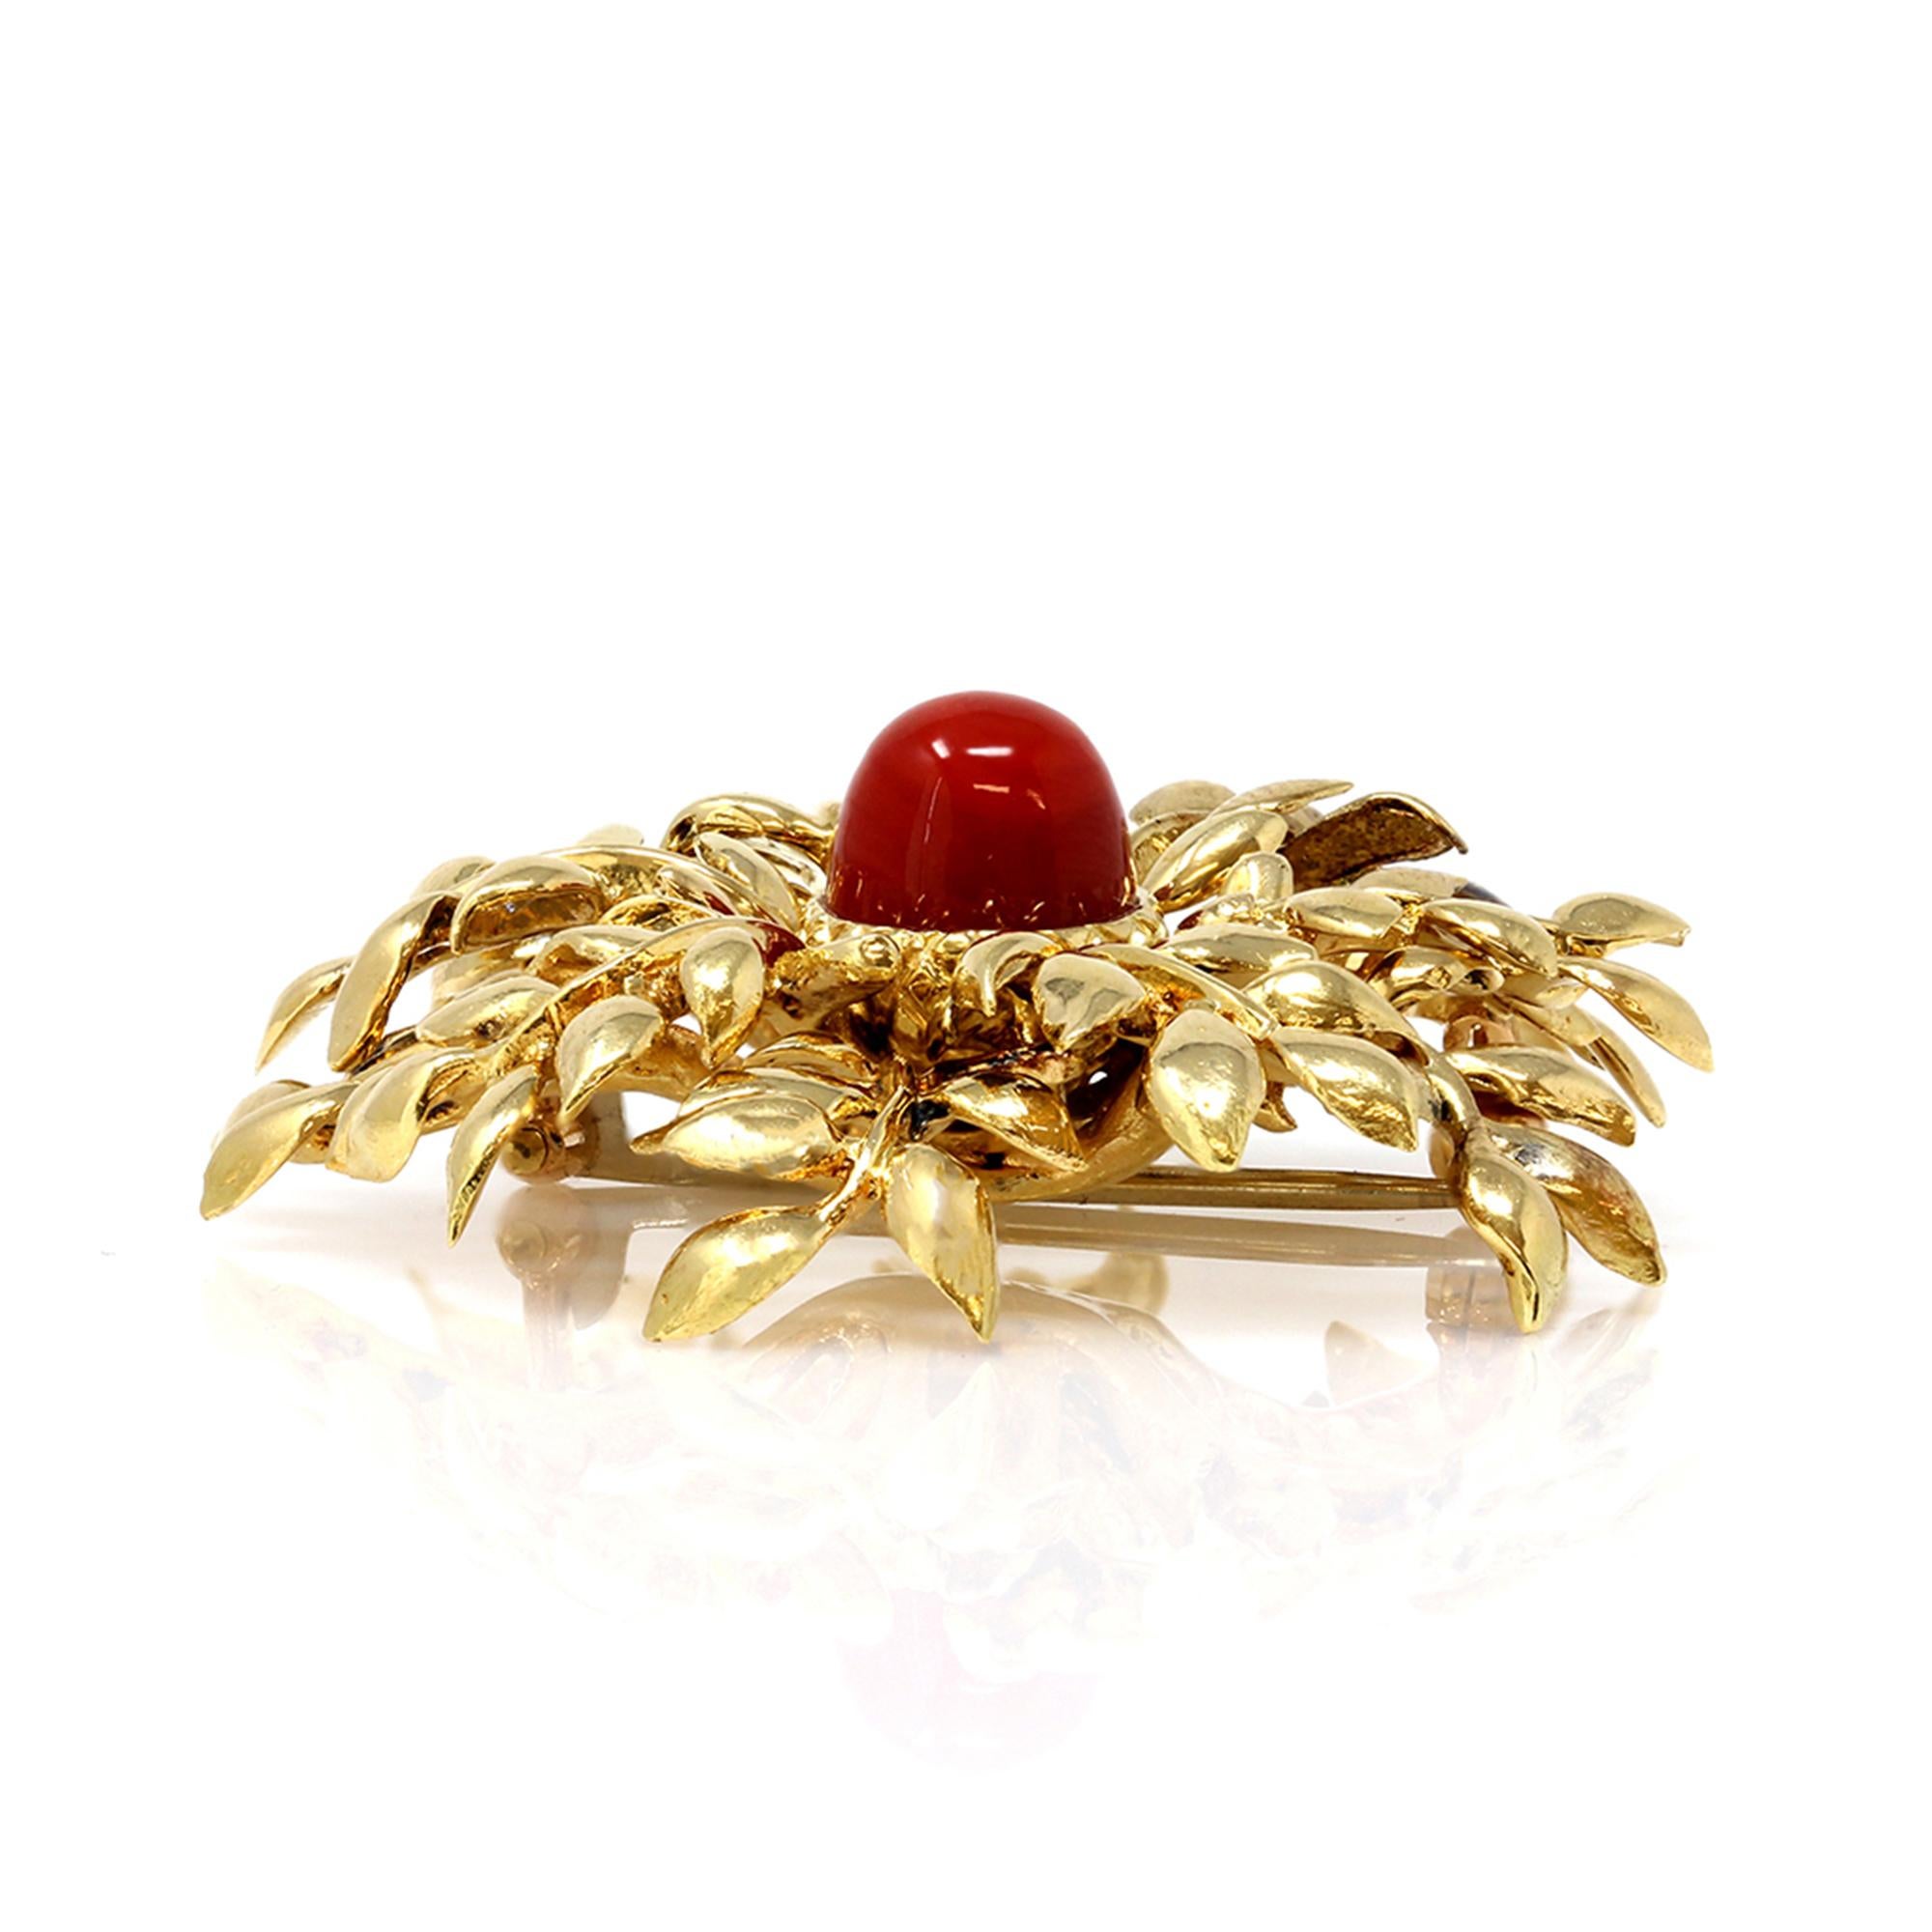 this egg is wearing a red brooch